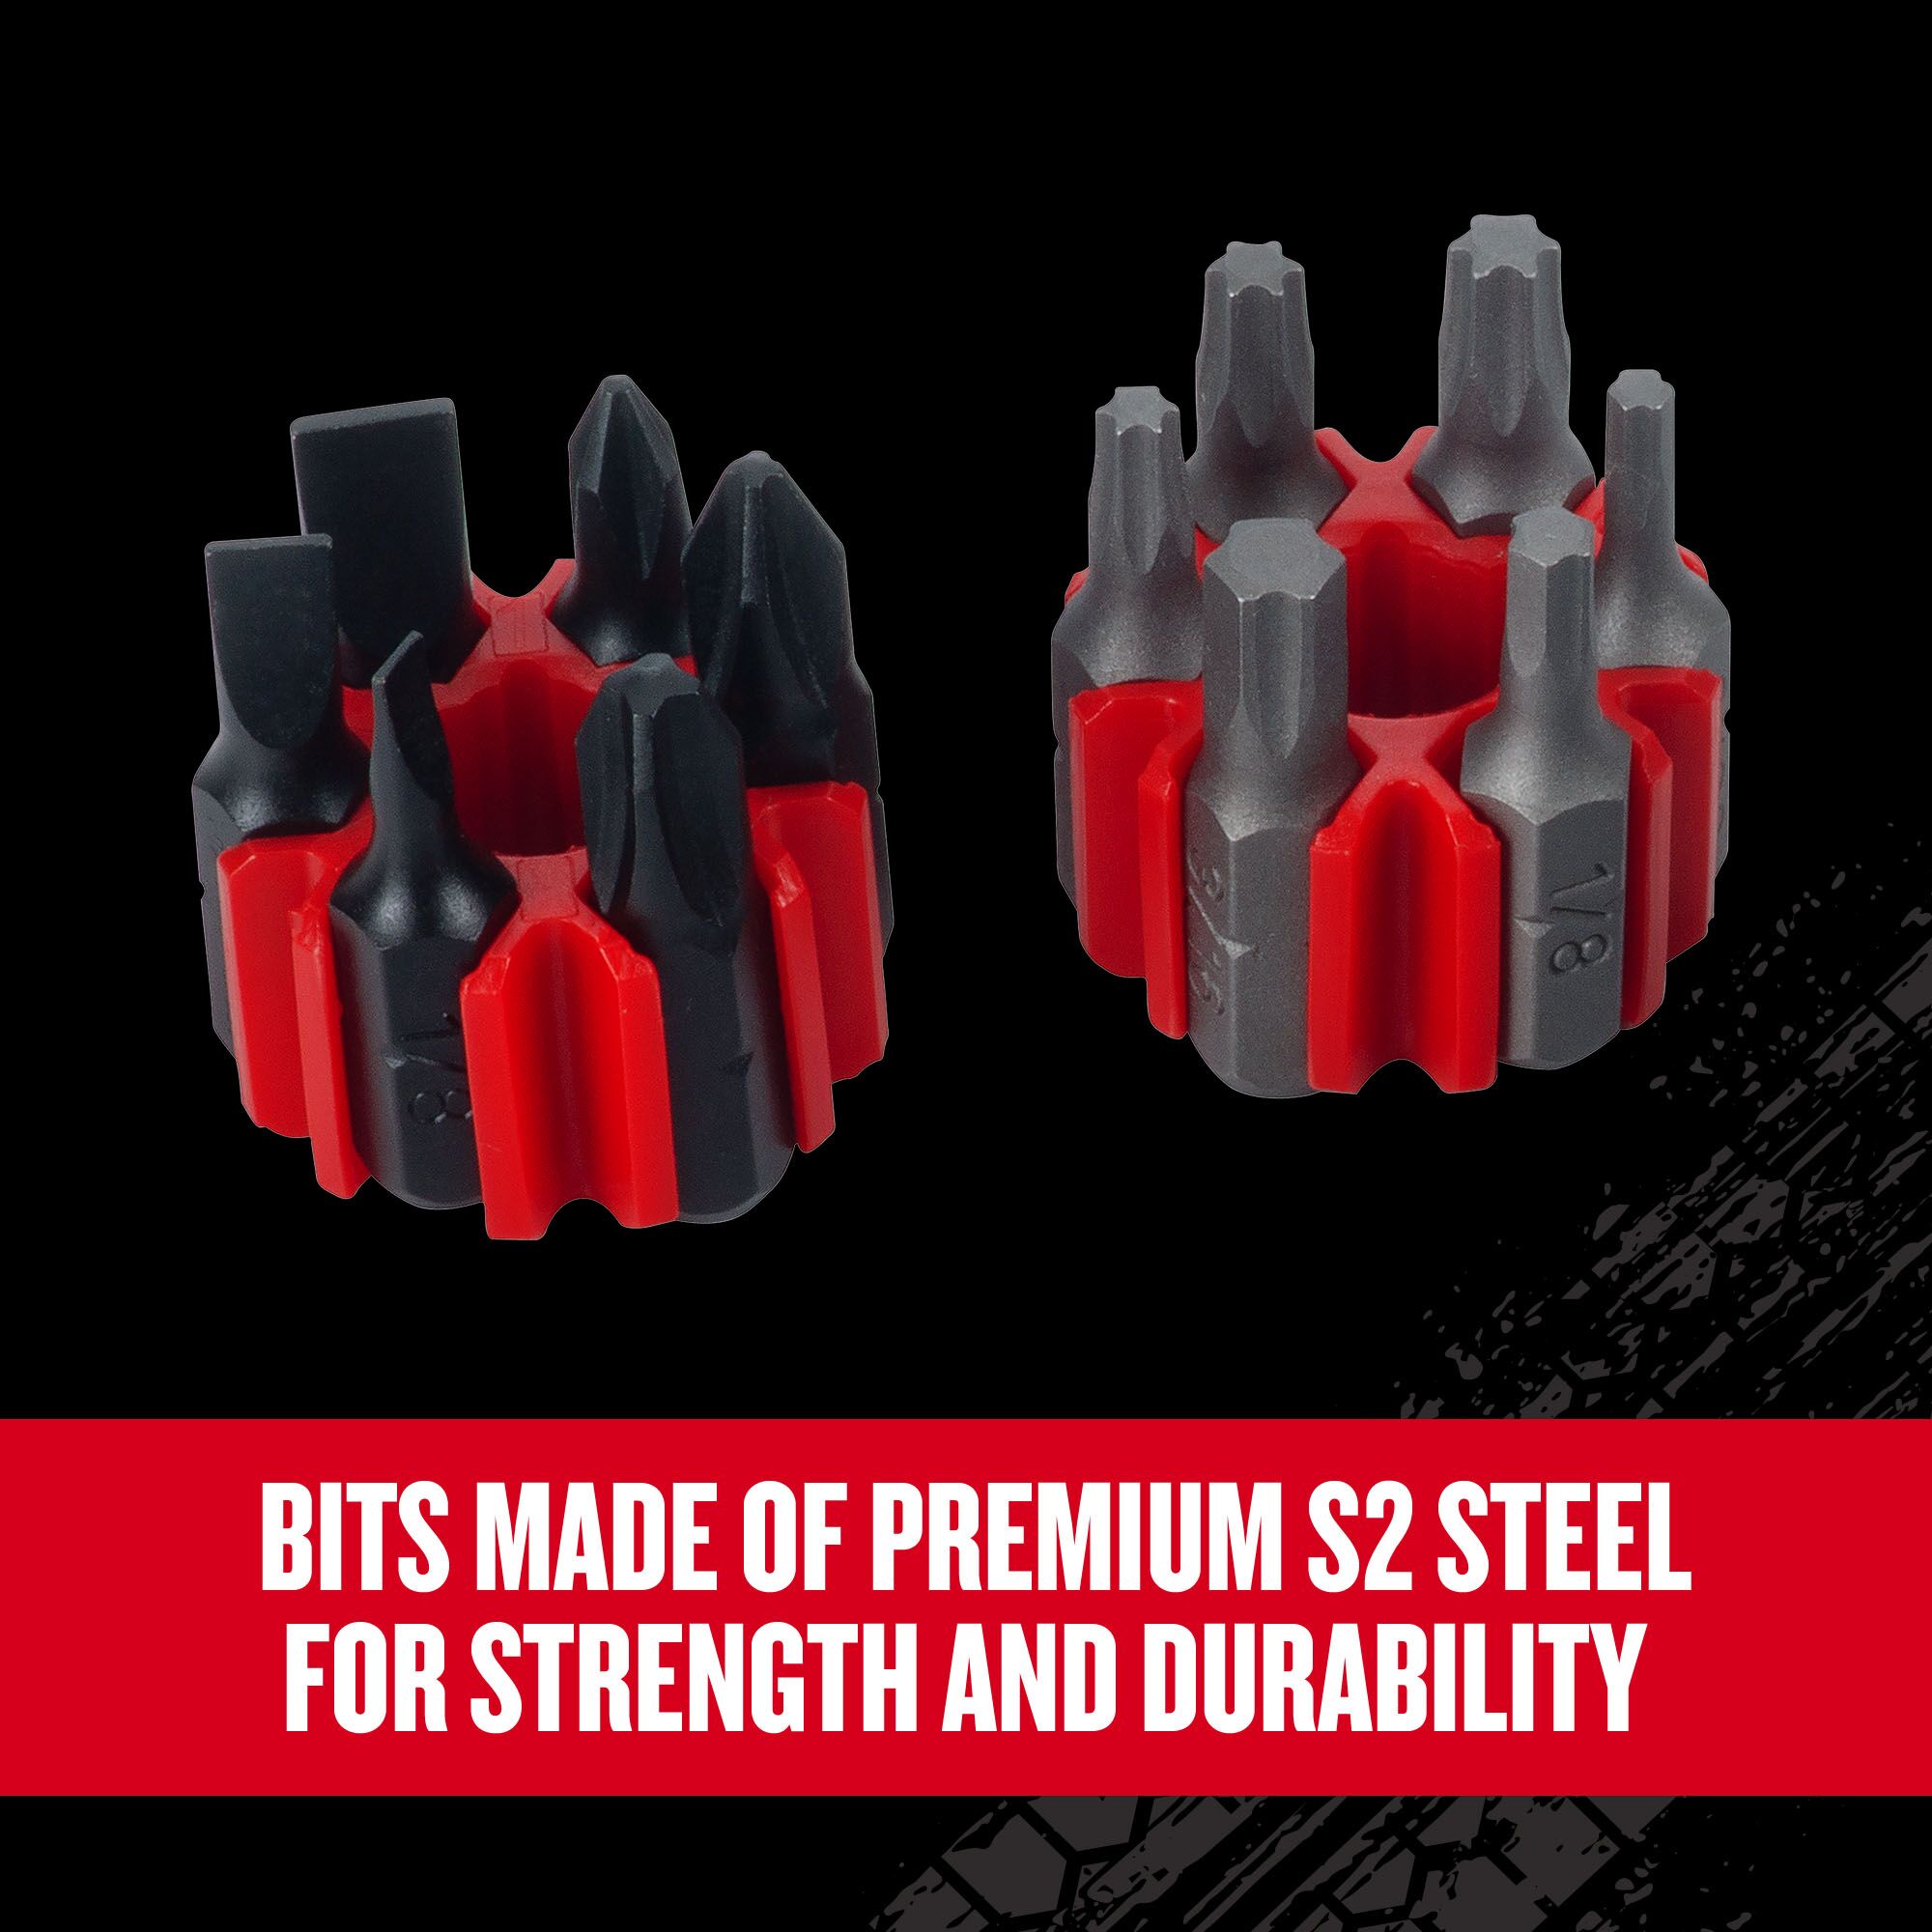 Graphic of CRAFTSMAN Screwdrivers highlighting product features